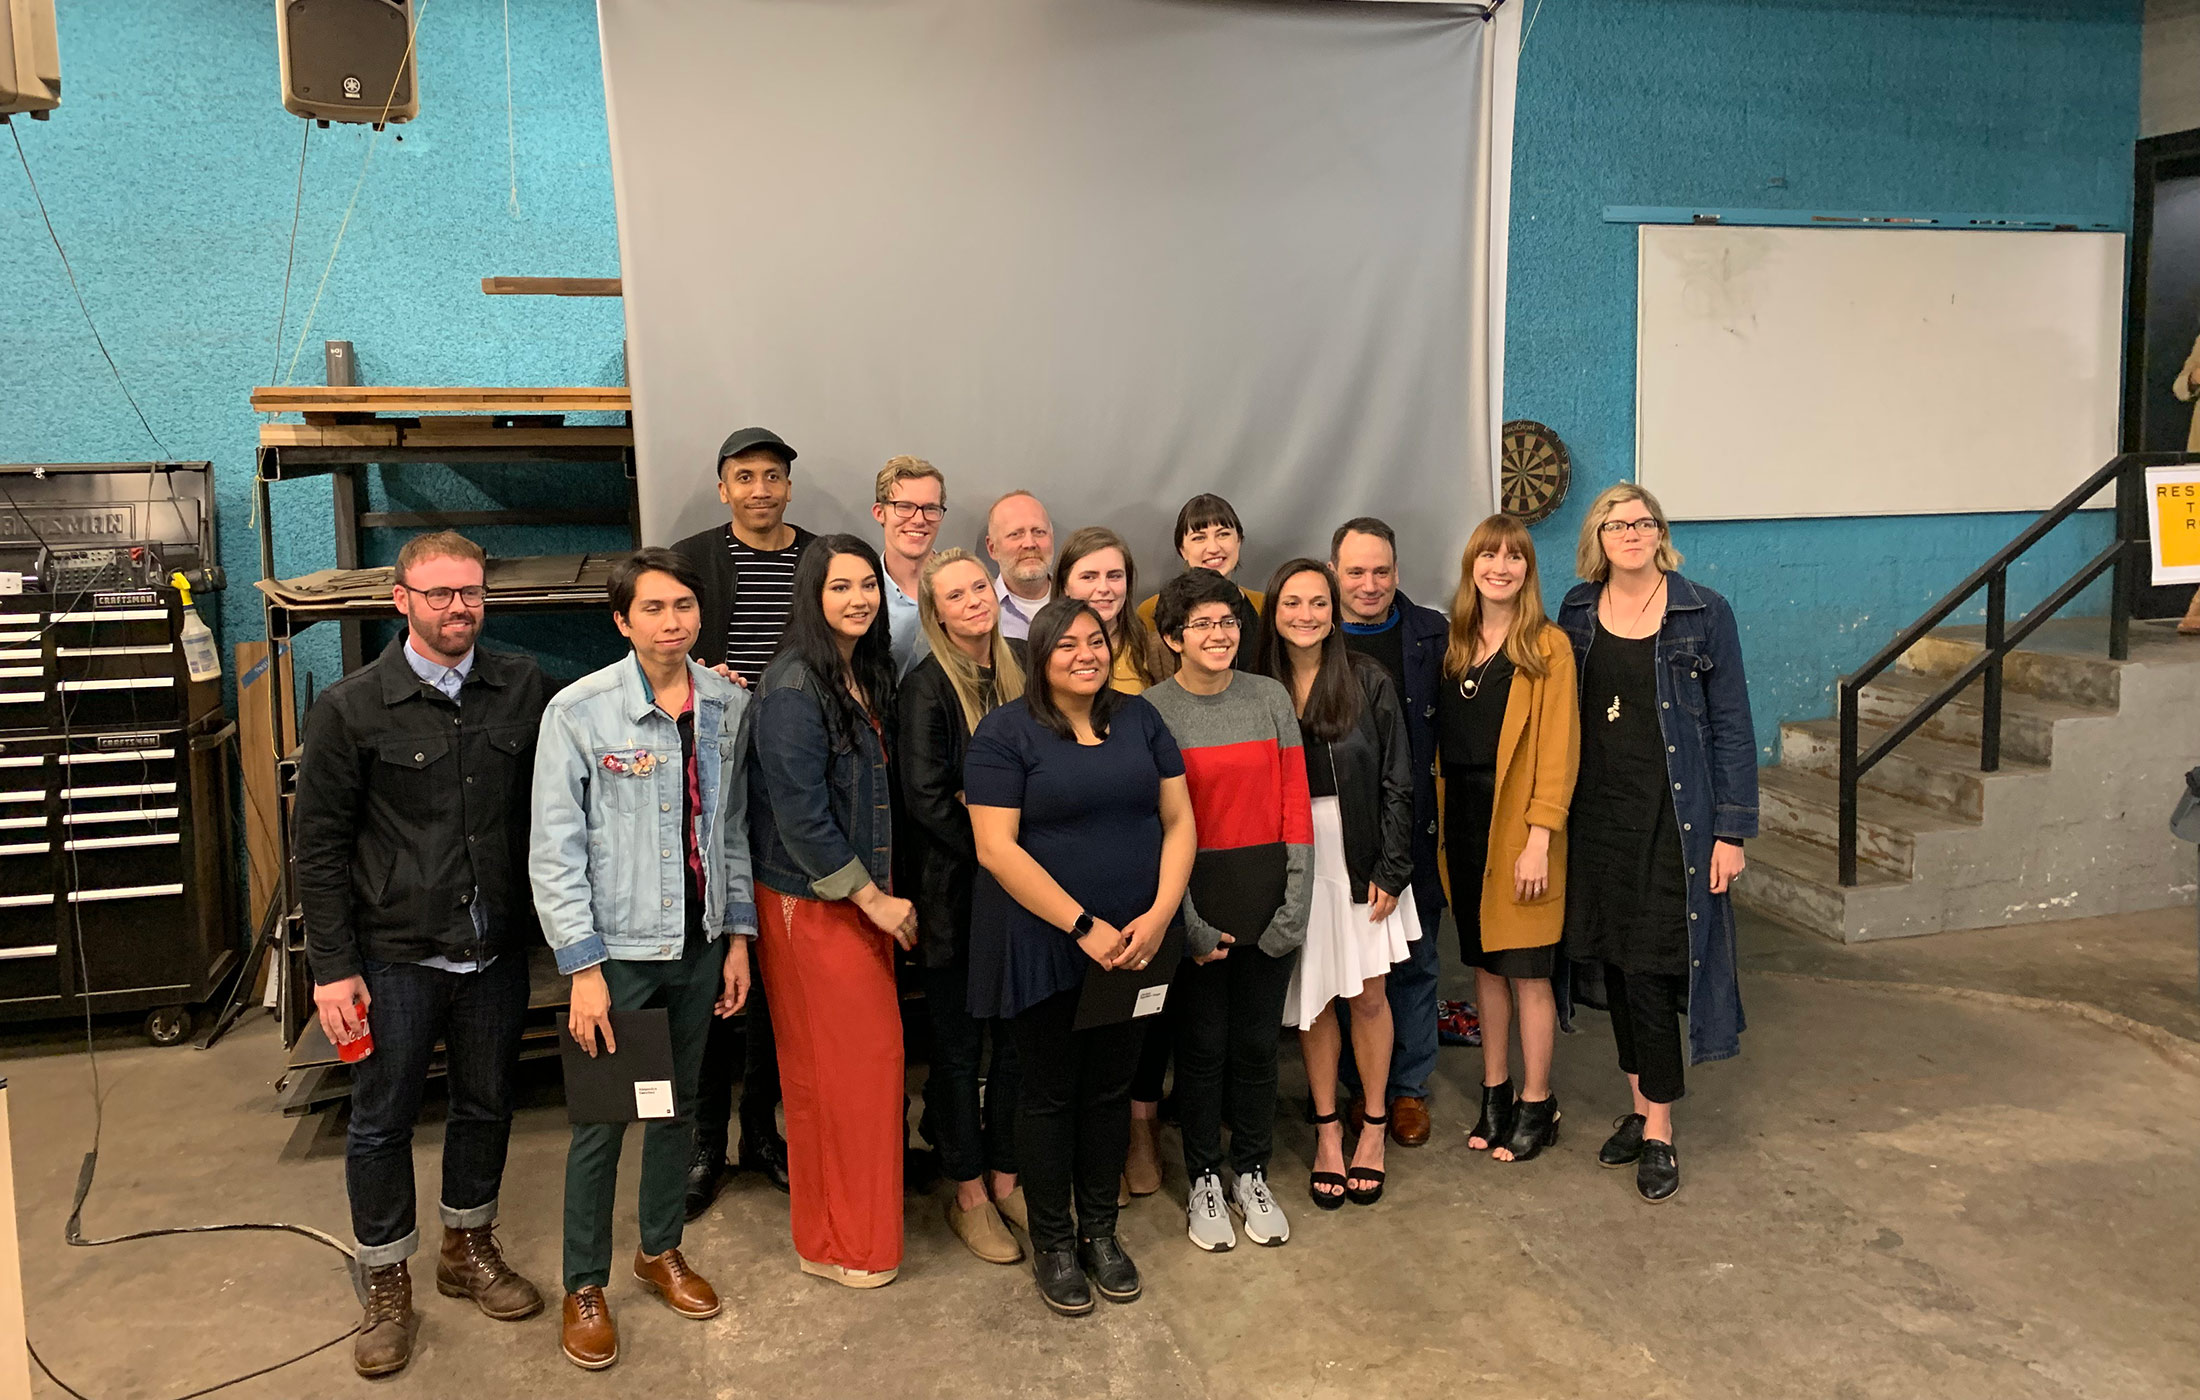 2019 graduates and faculty at the senior show and party